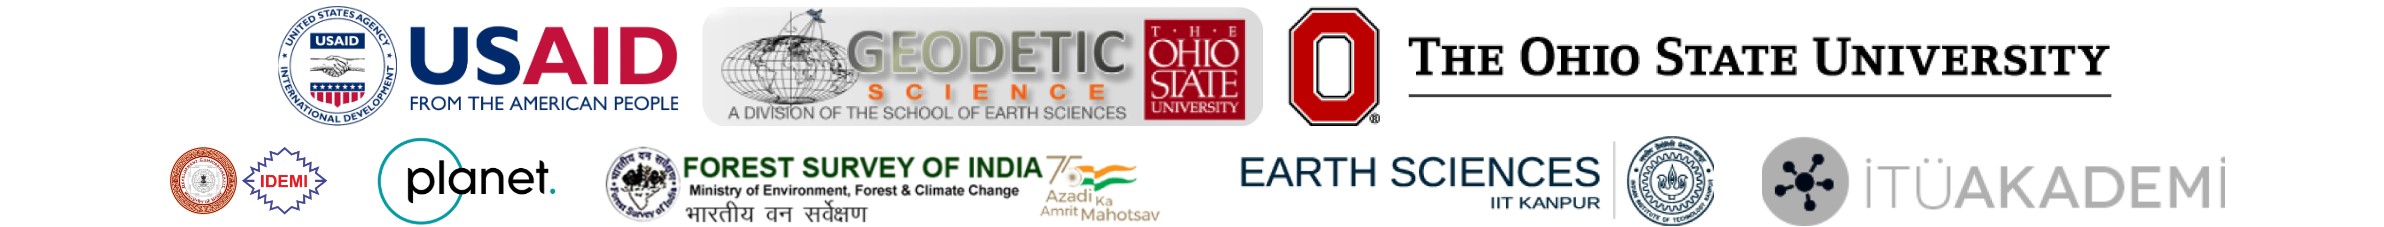 Logos of multiple places : USAID, The Ohio State University and Ohio State Geodetic Sciences, Planet, Forest Survey of India, Earth Sciences ITUAKADEMI